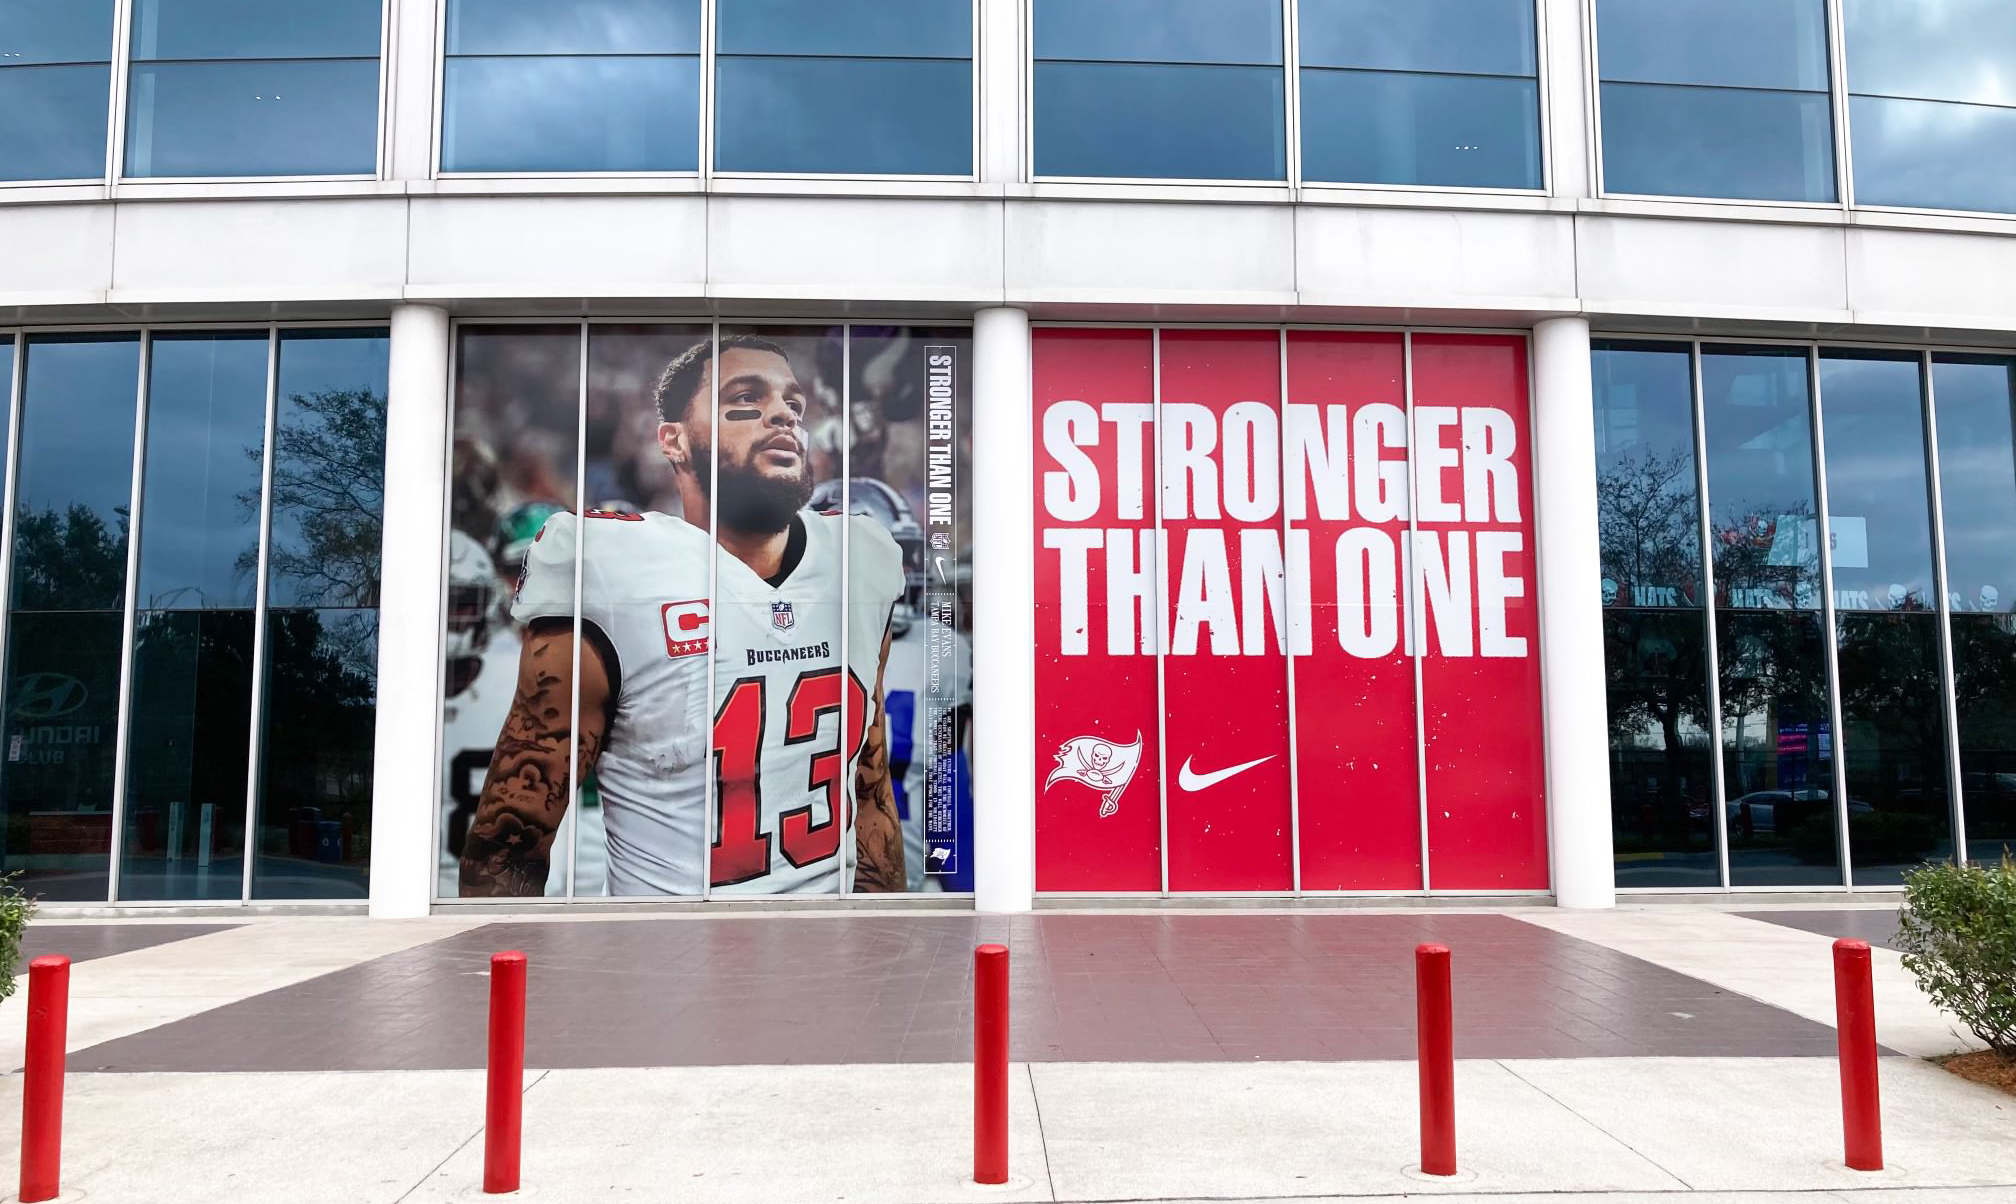 window film that says strong than one with football player